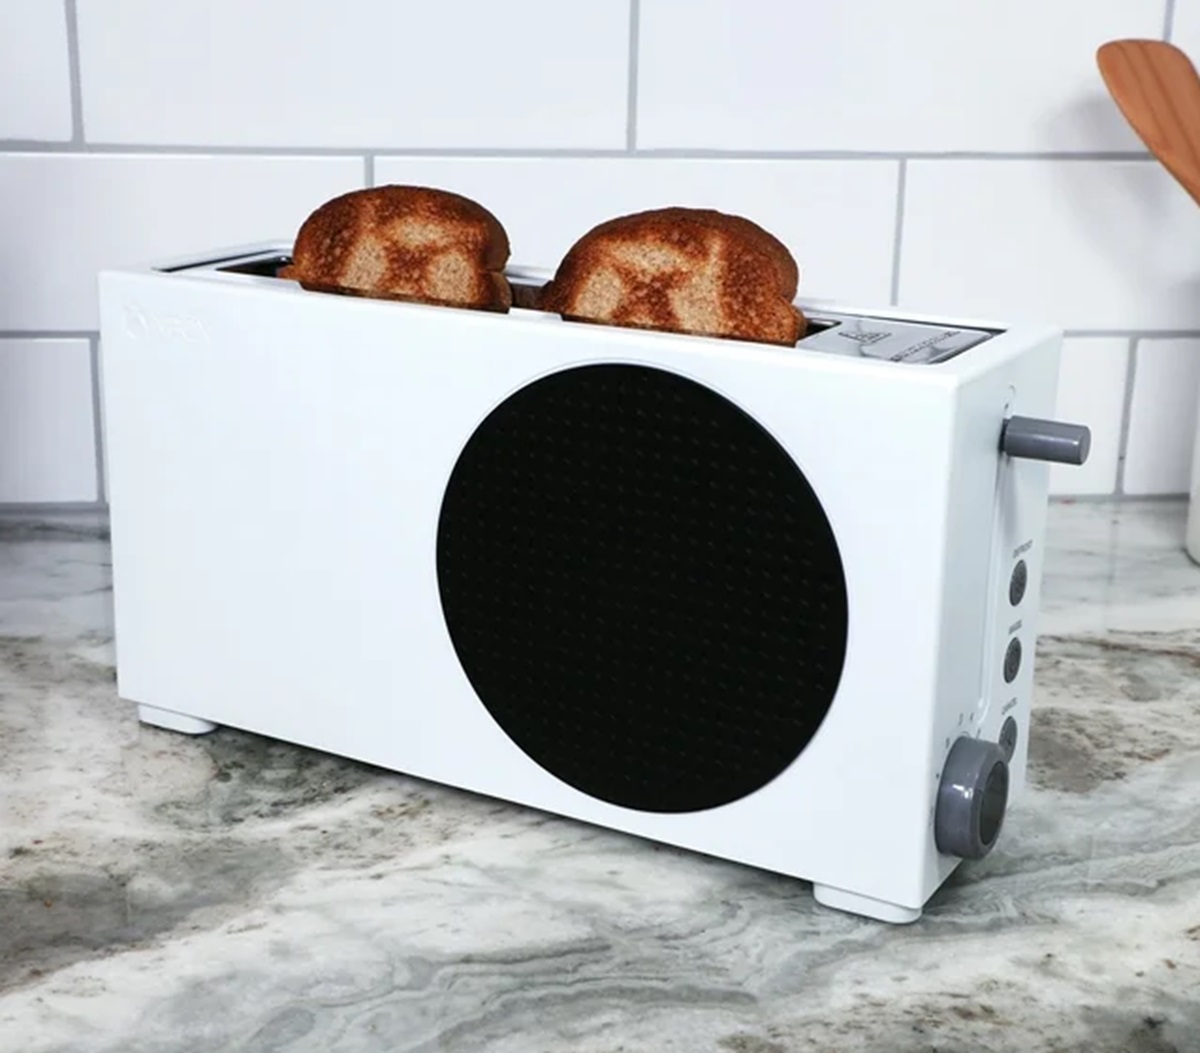 From Memes to Reality – The Xbox Series S Toaster is now Real